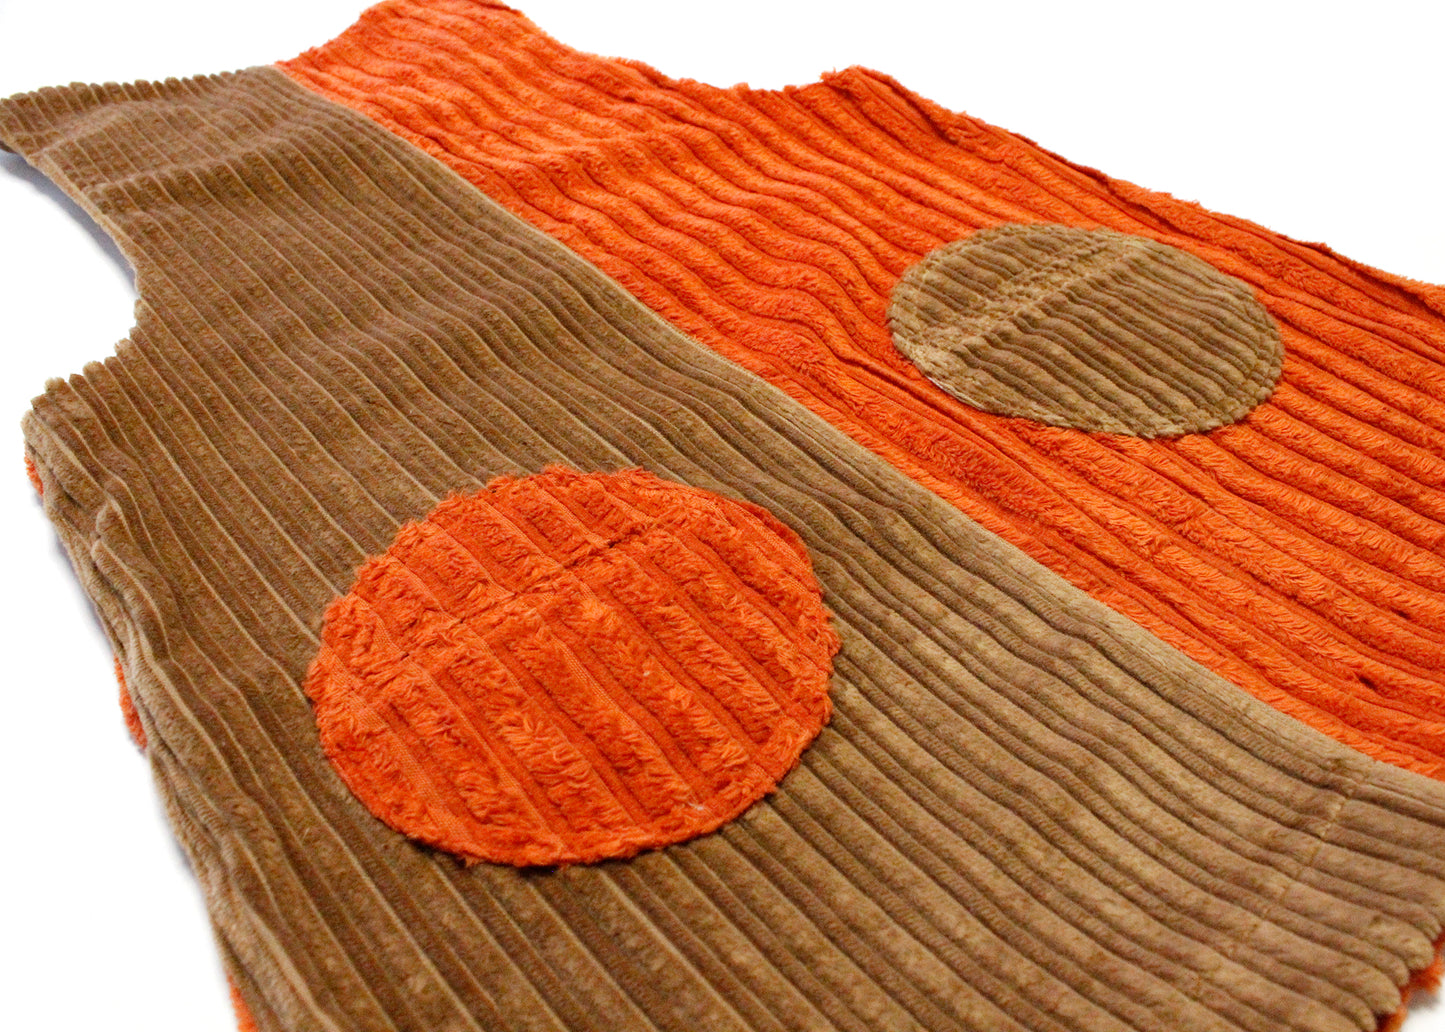 Holis Corduroy Jumper in Brownie Points (Made to Order)